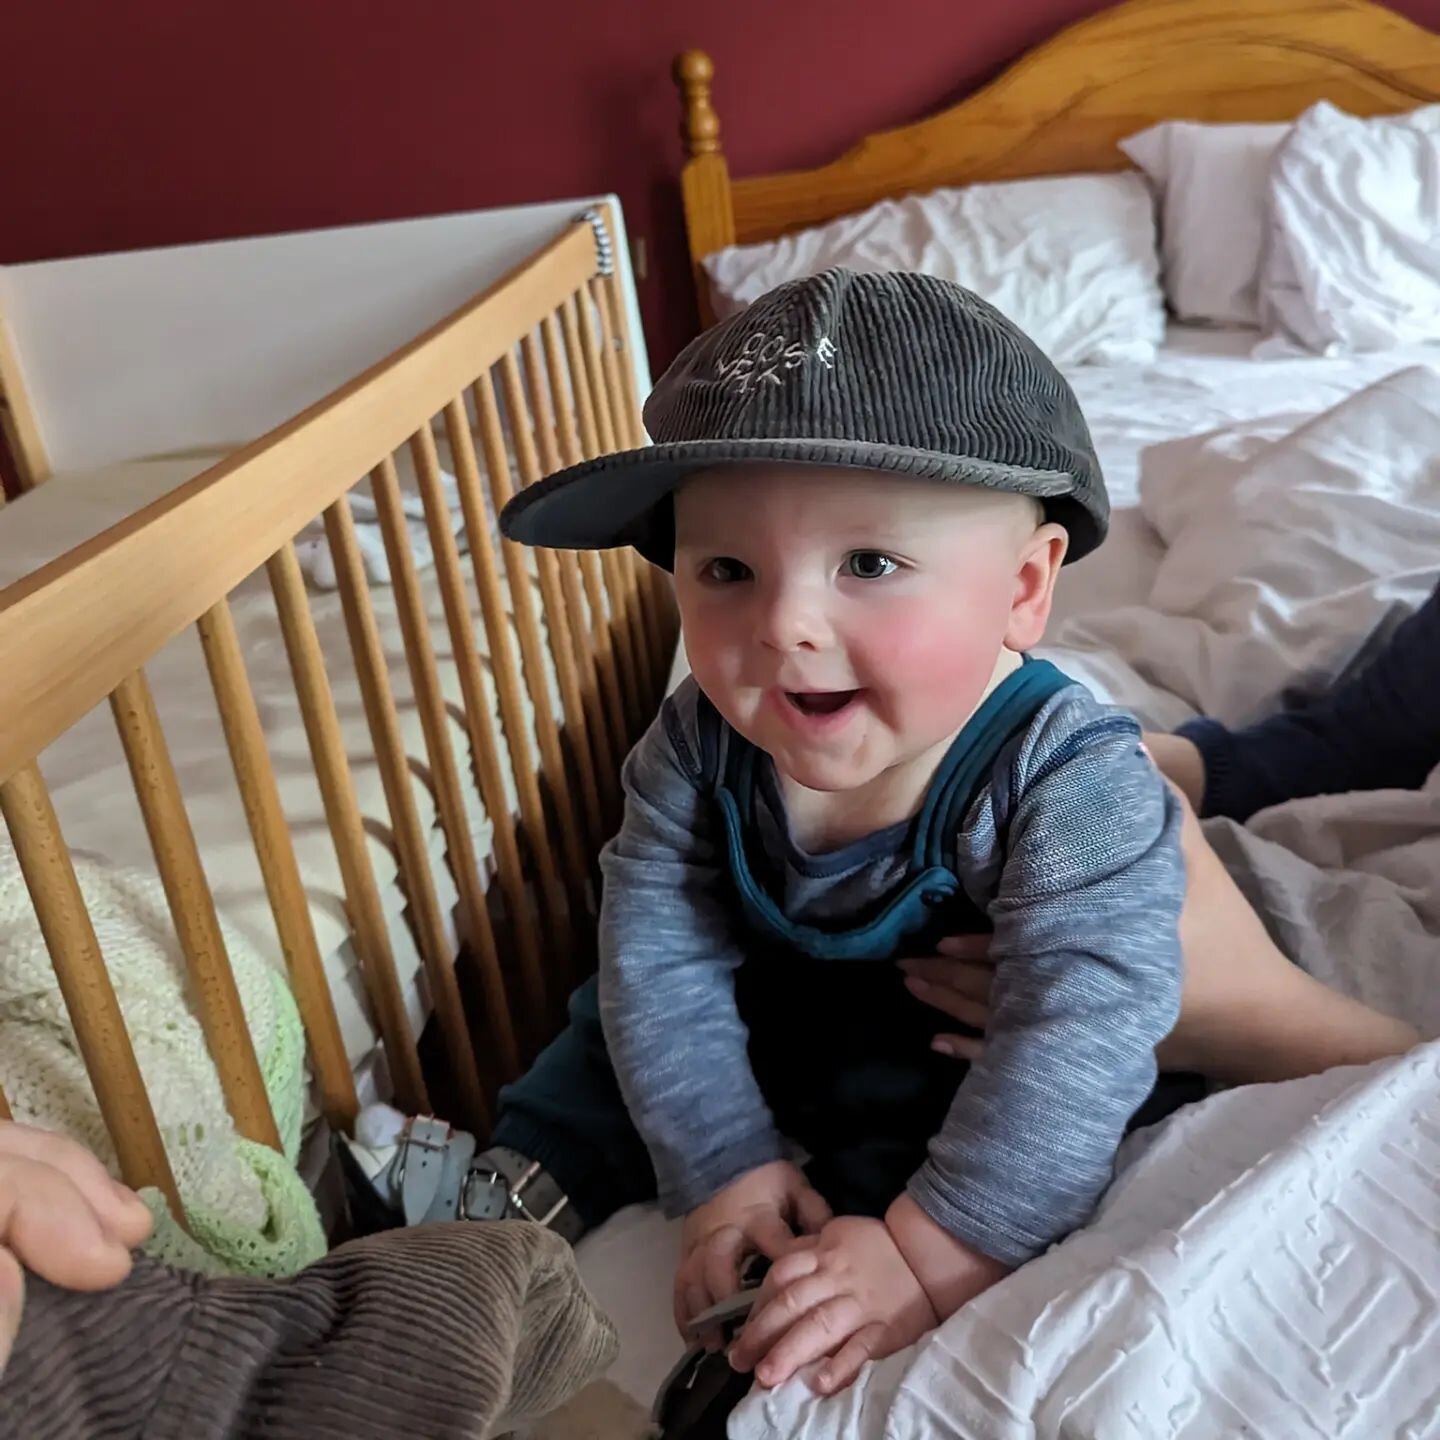 The are still some Loose Fit caps and t-shirts available. No guarantees you will look as cool as this dude though.

#garms #merch #cap #babymario #babyboy